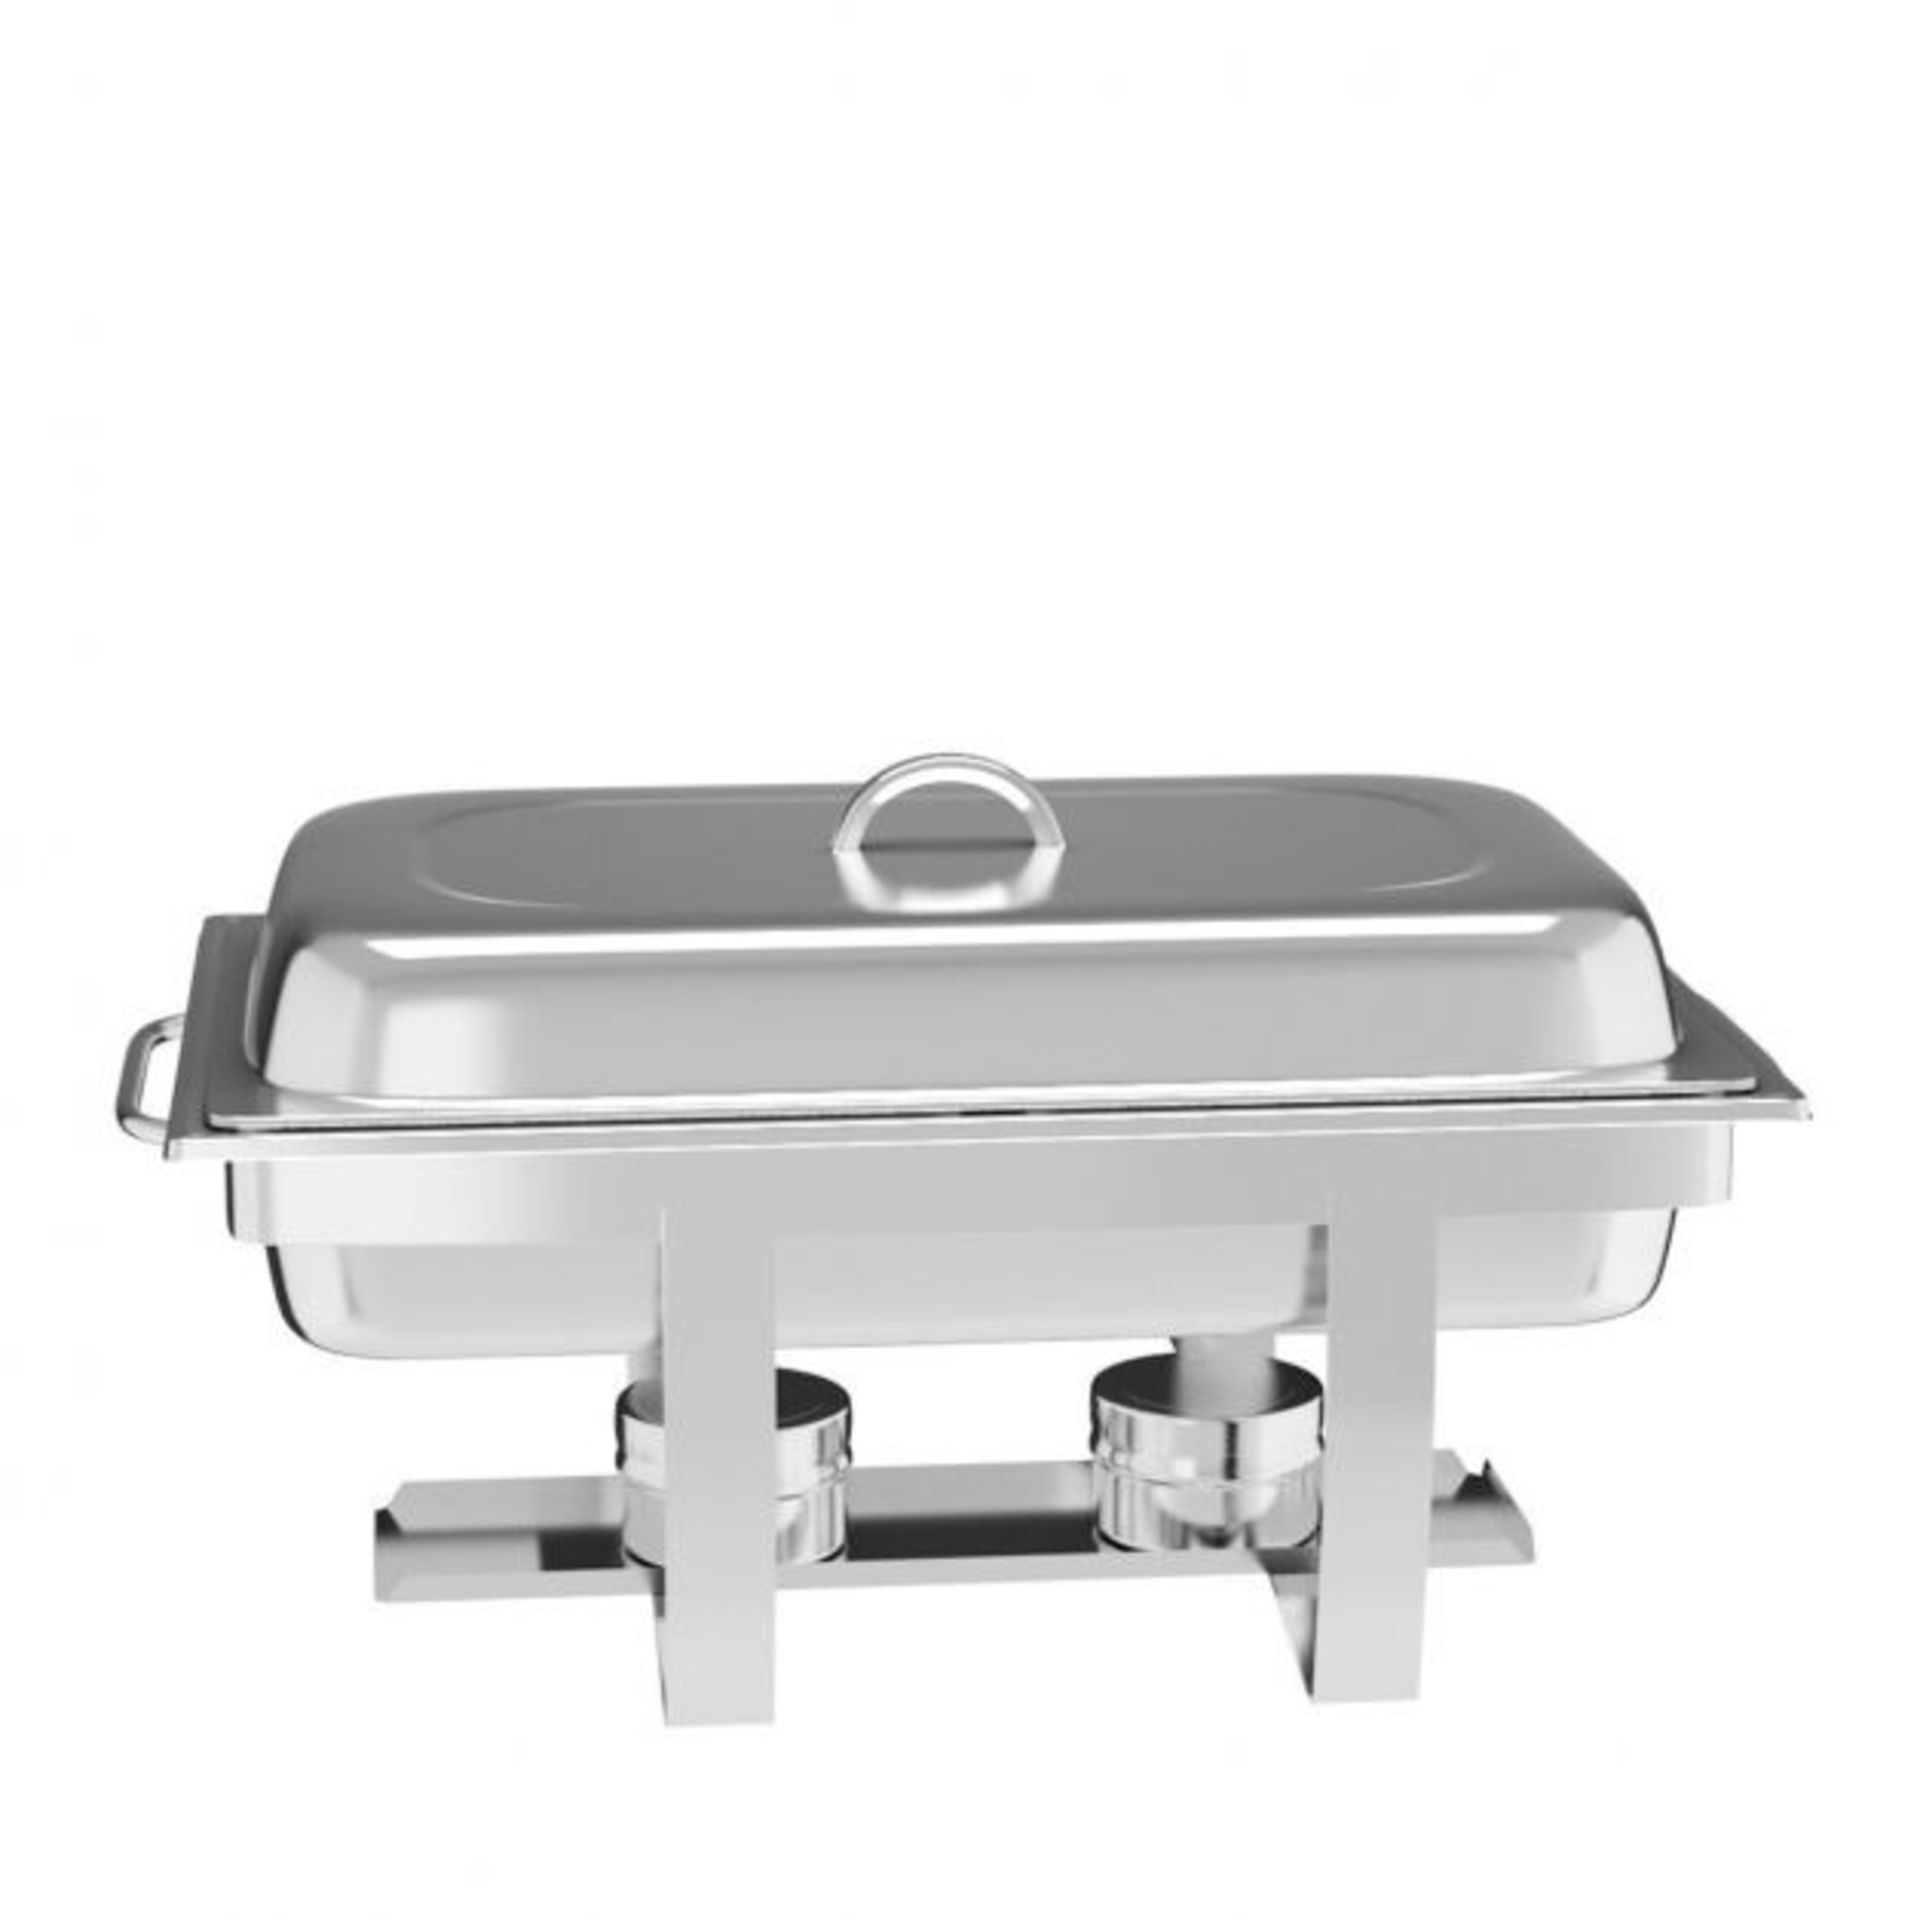 2 Pack 9L Stainless Steel Food Warmers Set - ER53